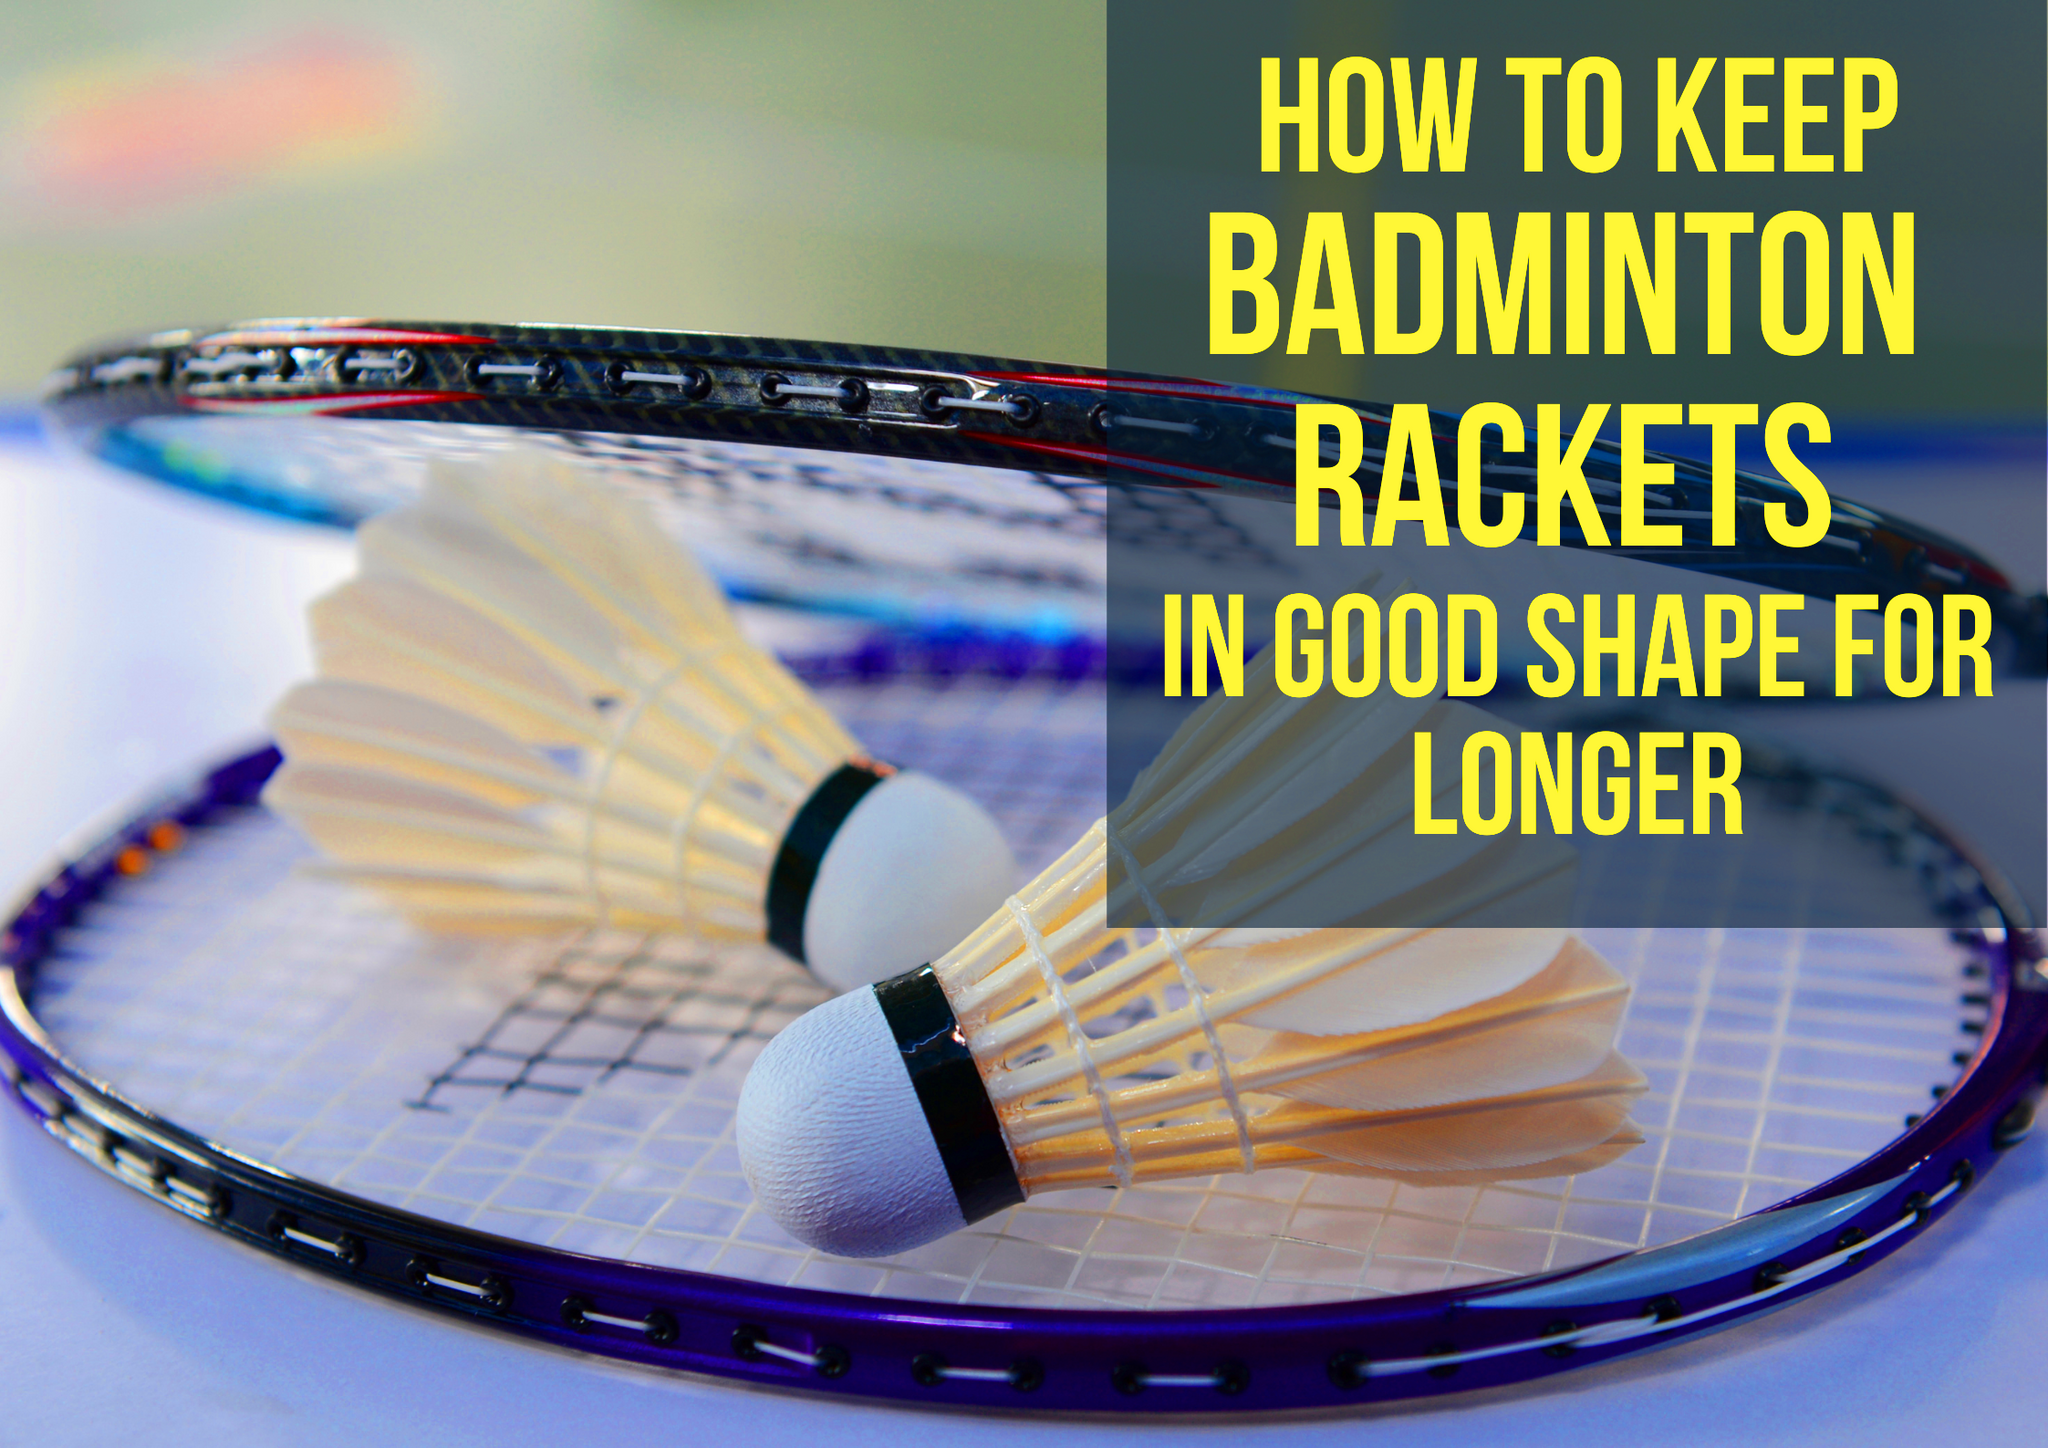 How to Keep Badminton Rackets in Good Shape for Longer